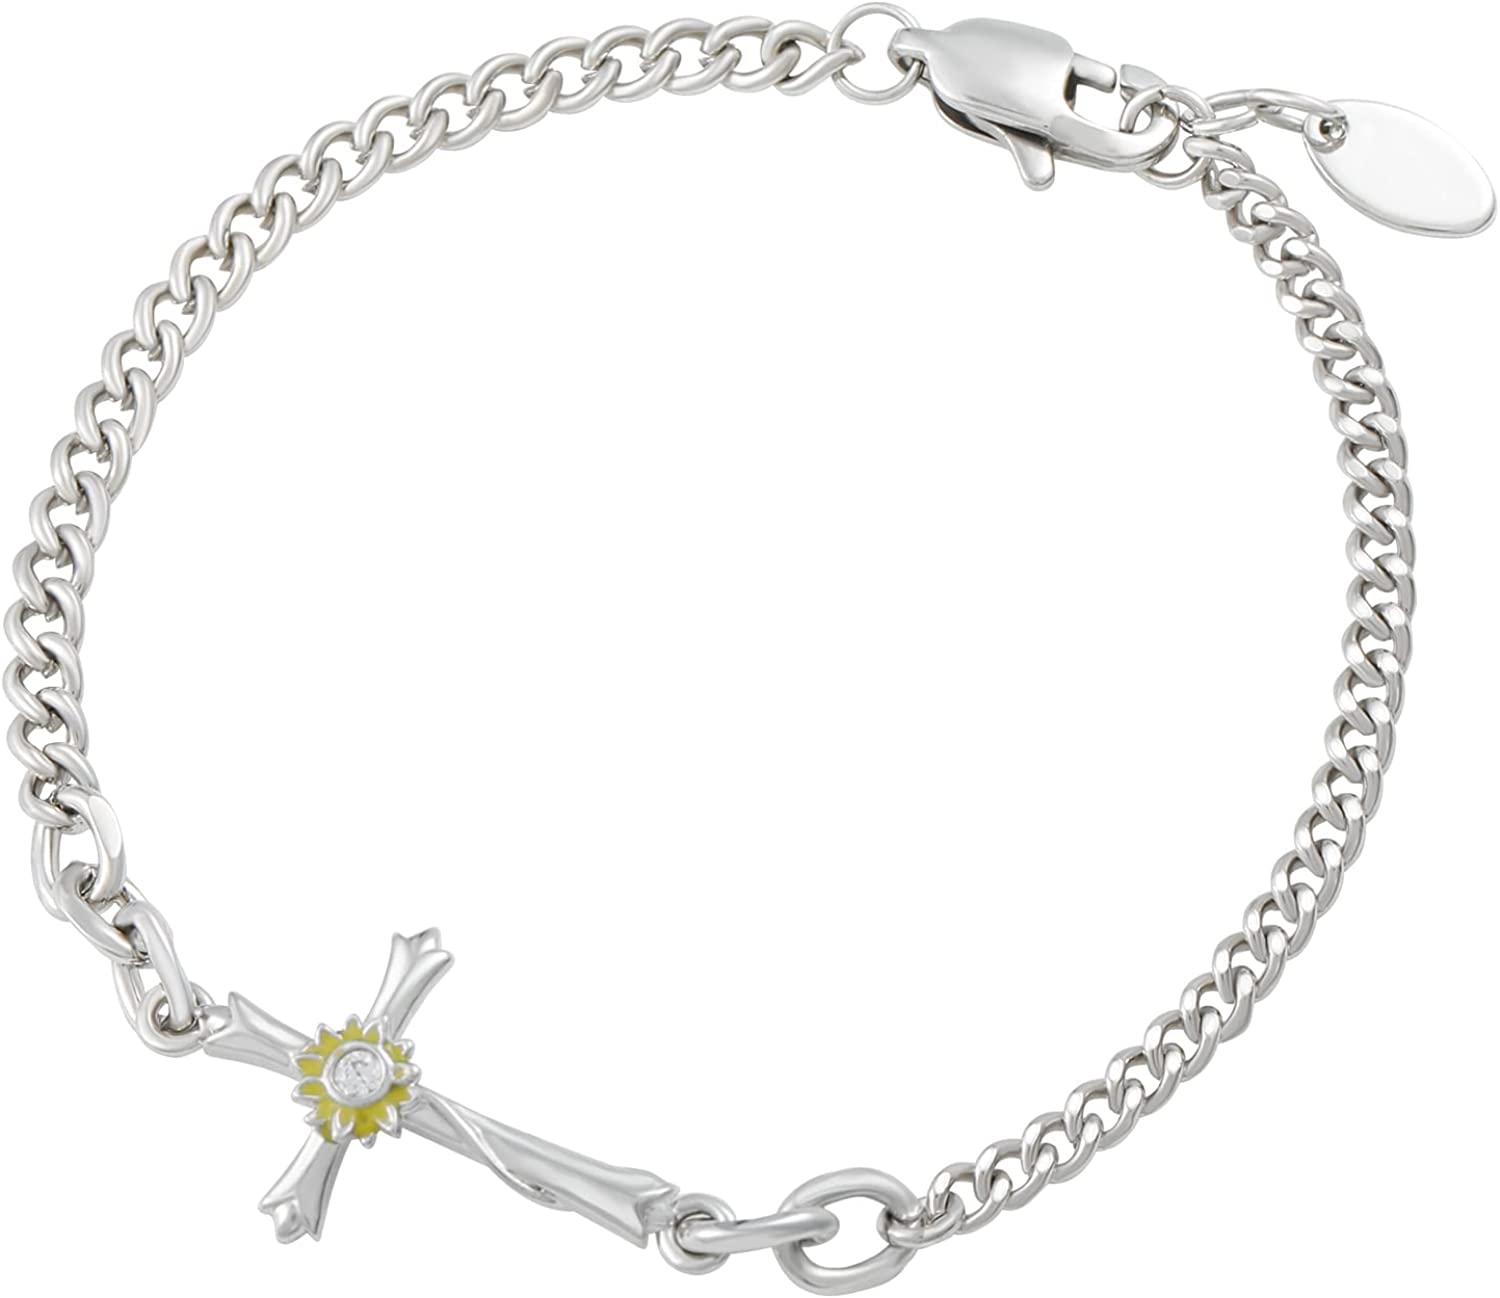 Very Delicate Glossy With Cross Pattern Dull Finish Silver Color Bracelet -  Style A679 – Soni Fashion®